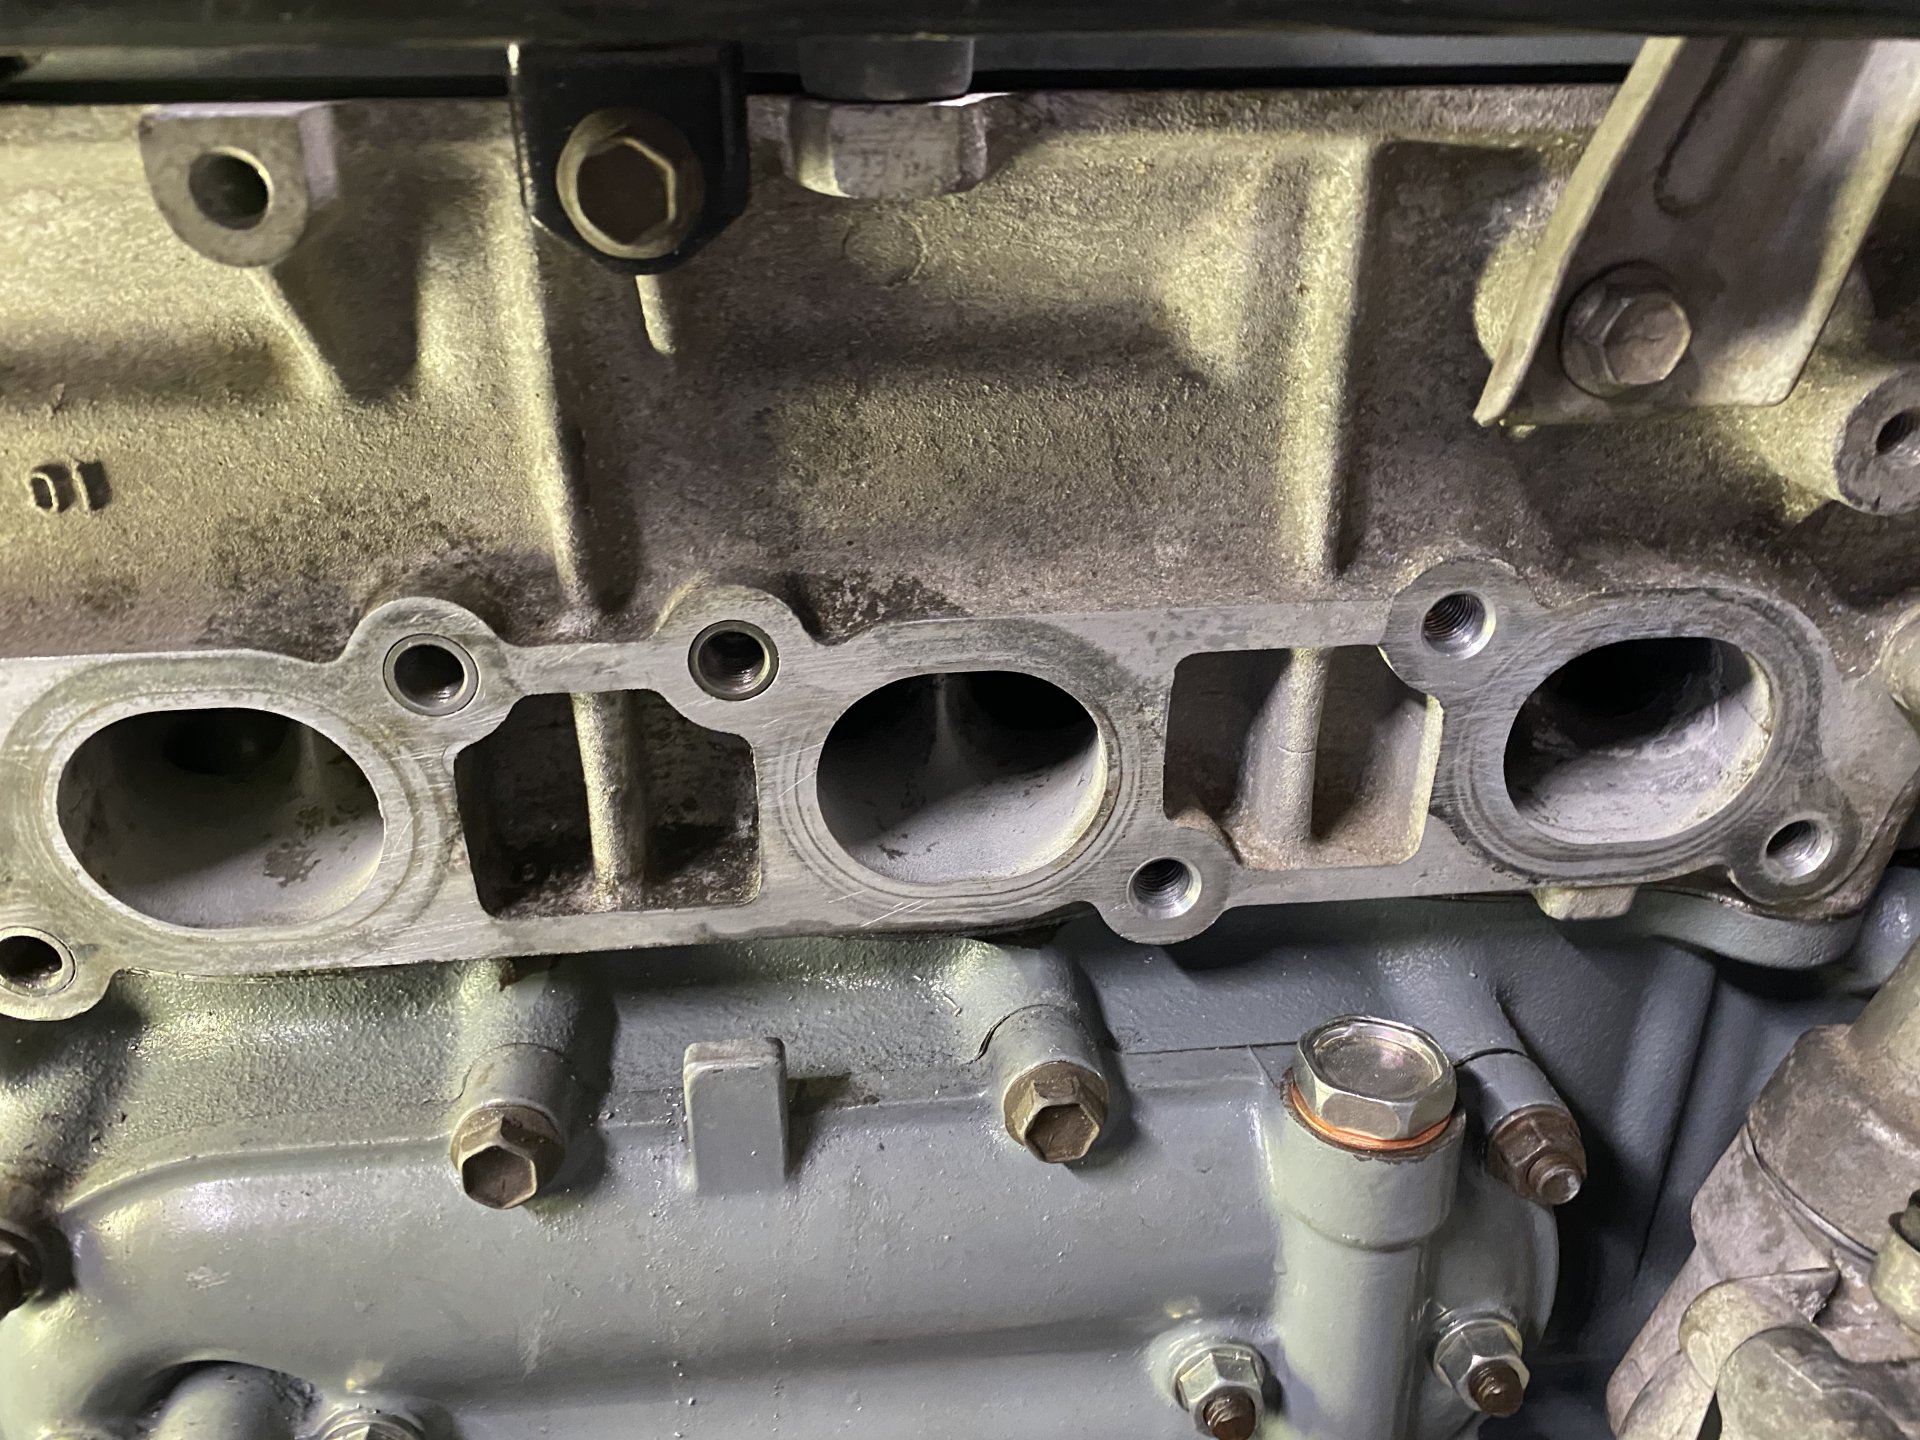 Stripped exhaust manifold hole in head -need some advice | IH8MUD Forum